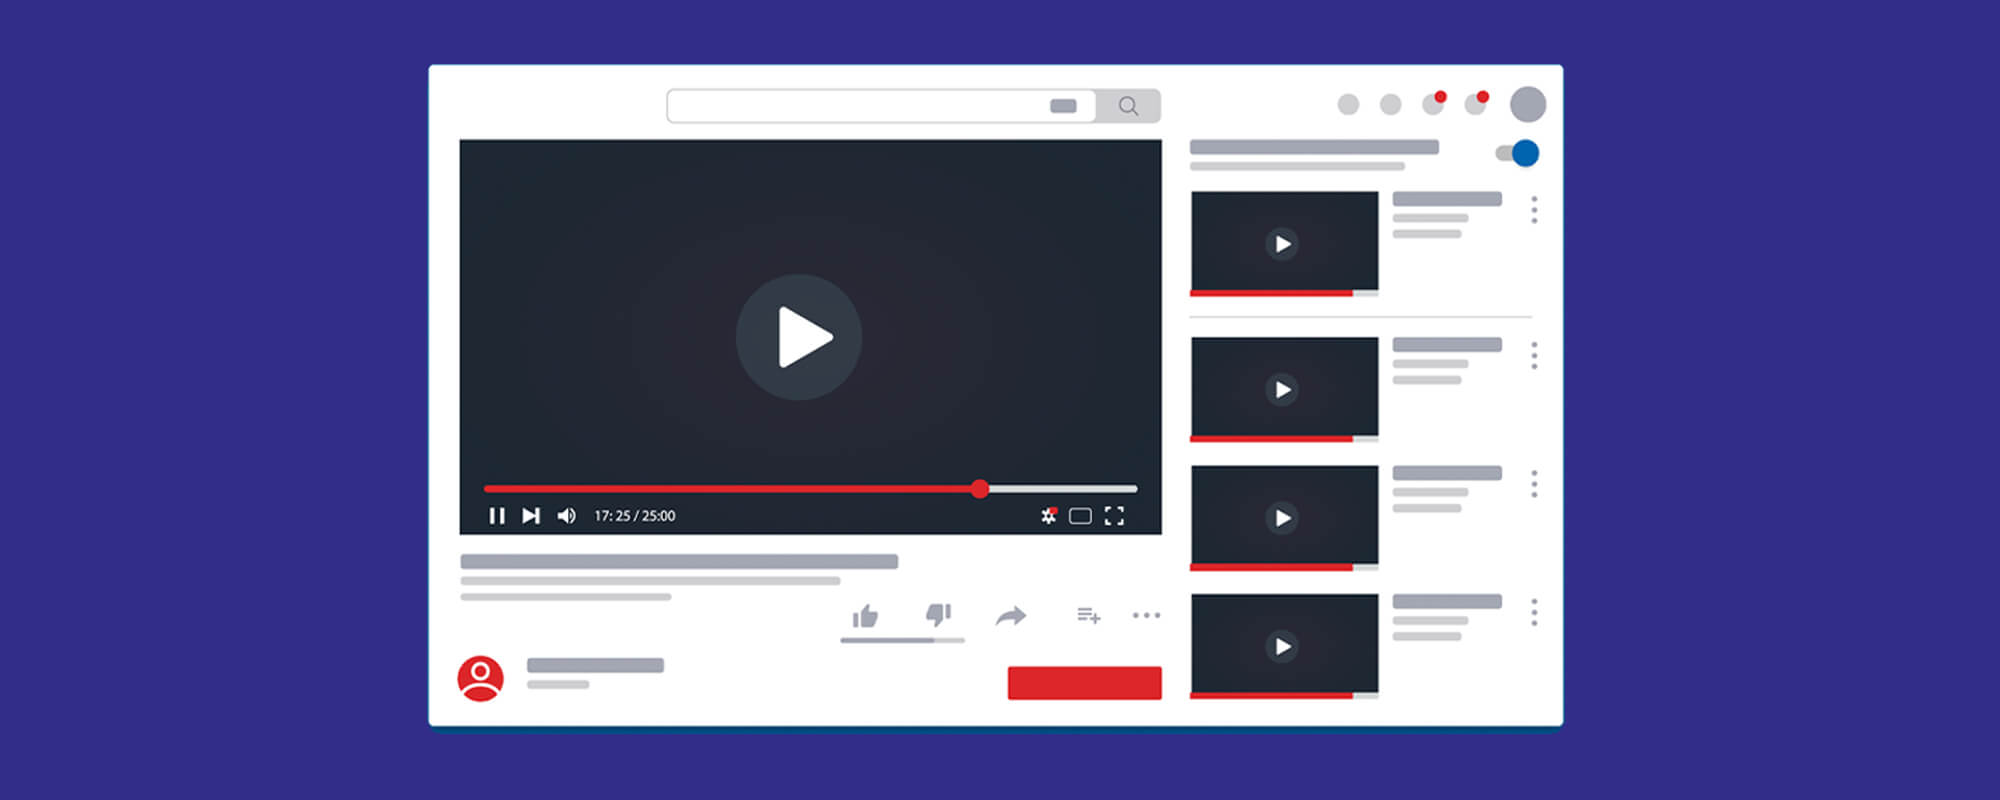 YouTube Video-Player-Layout.